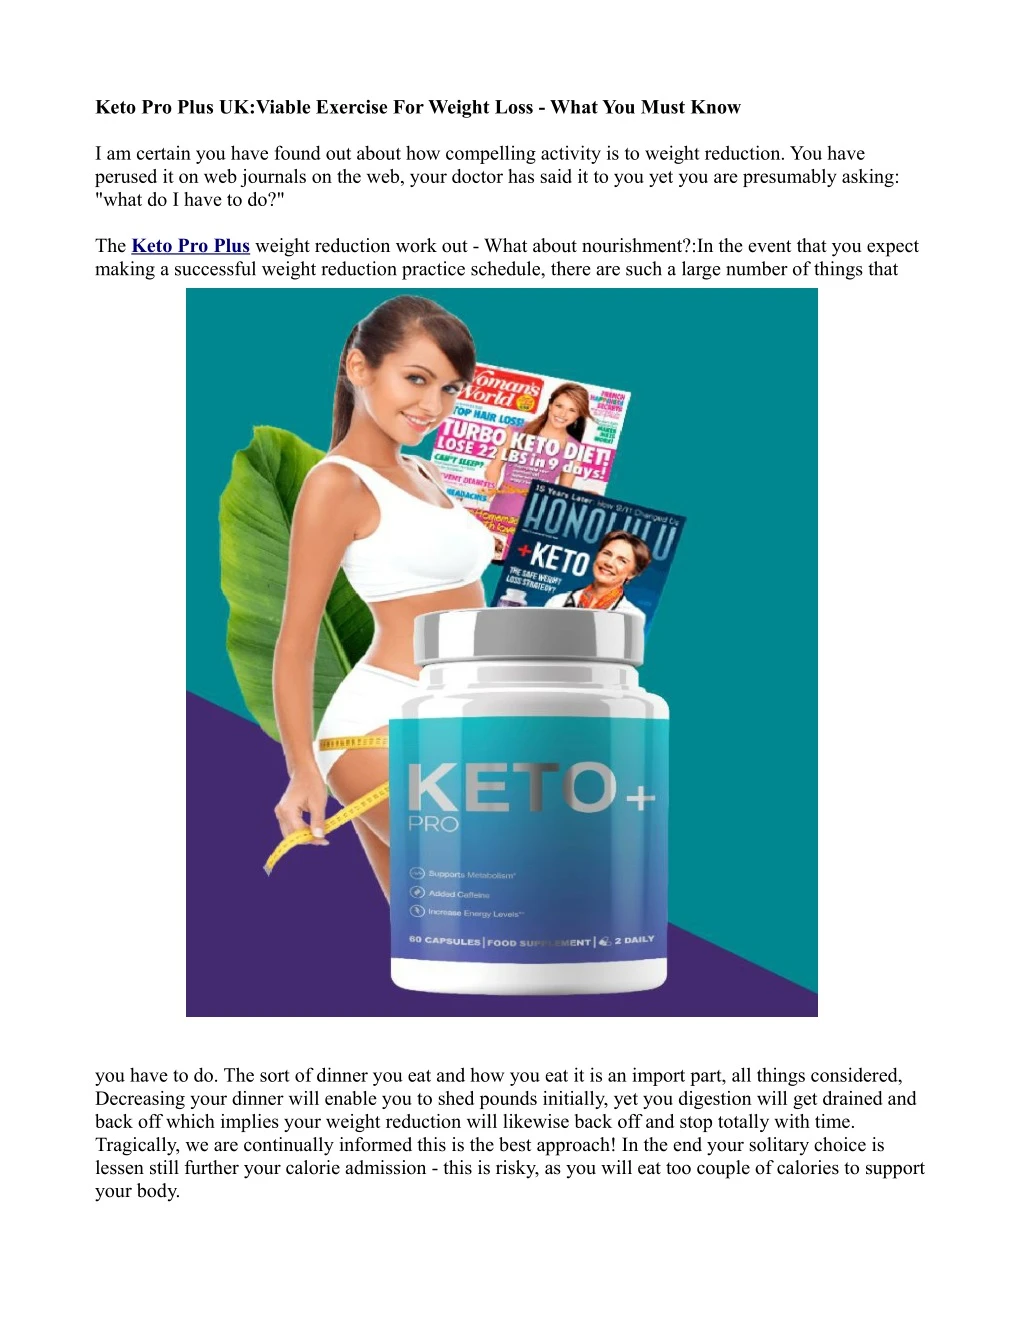 keto pro plus uk viable exercise for weight loss